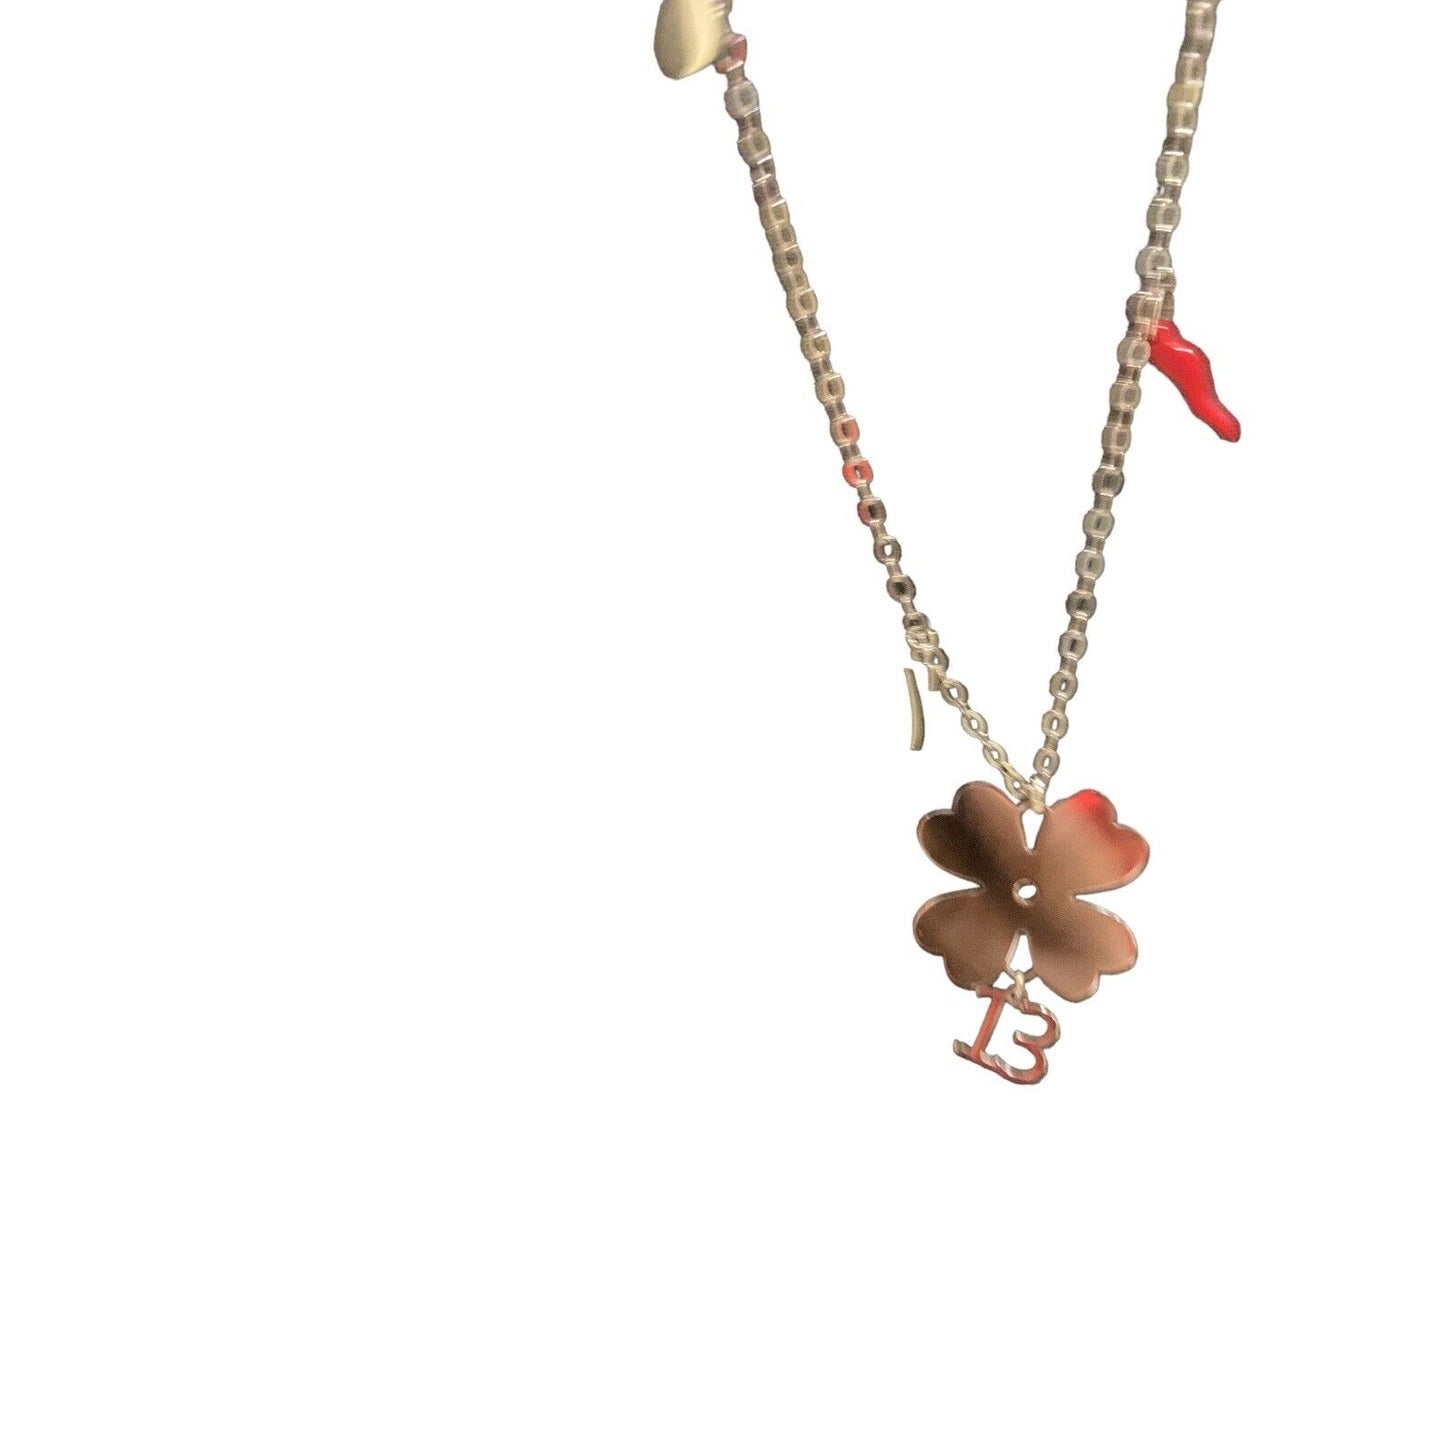 Canipelli Firenze Palladium Plated Necklace with Four Leaf Clover & “B” Pendant